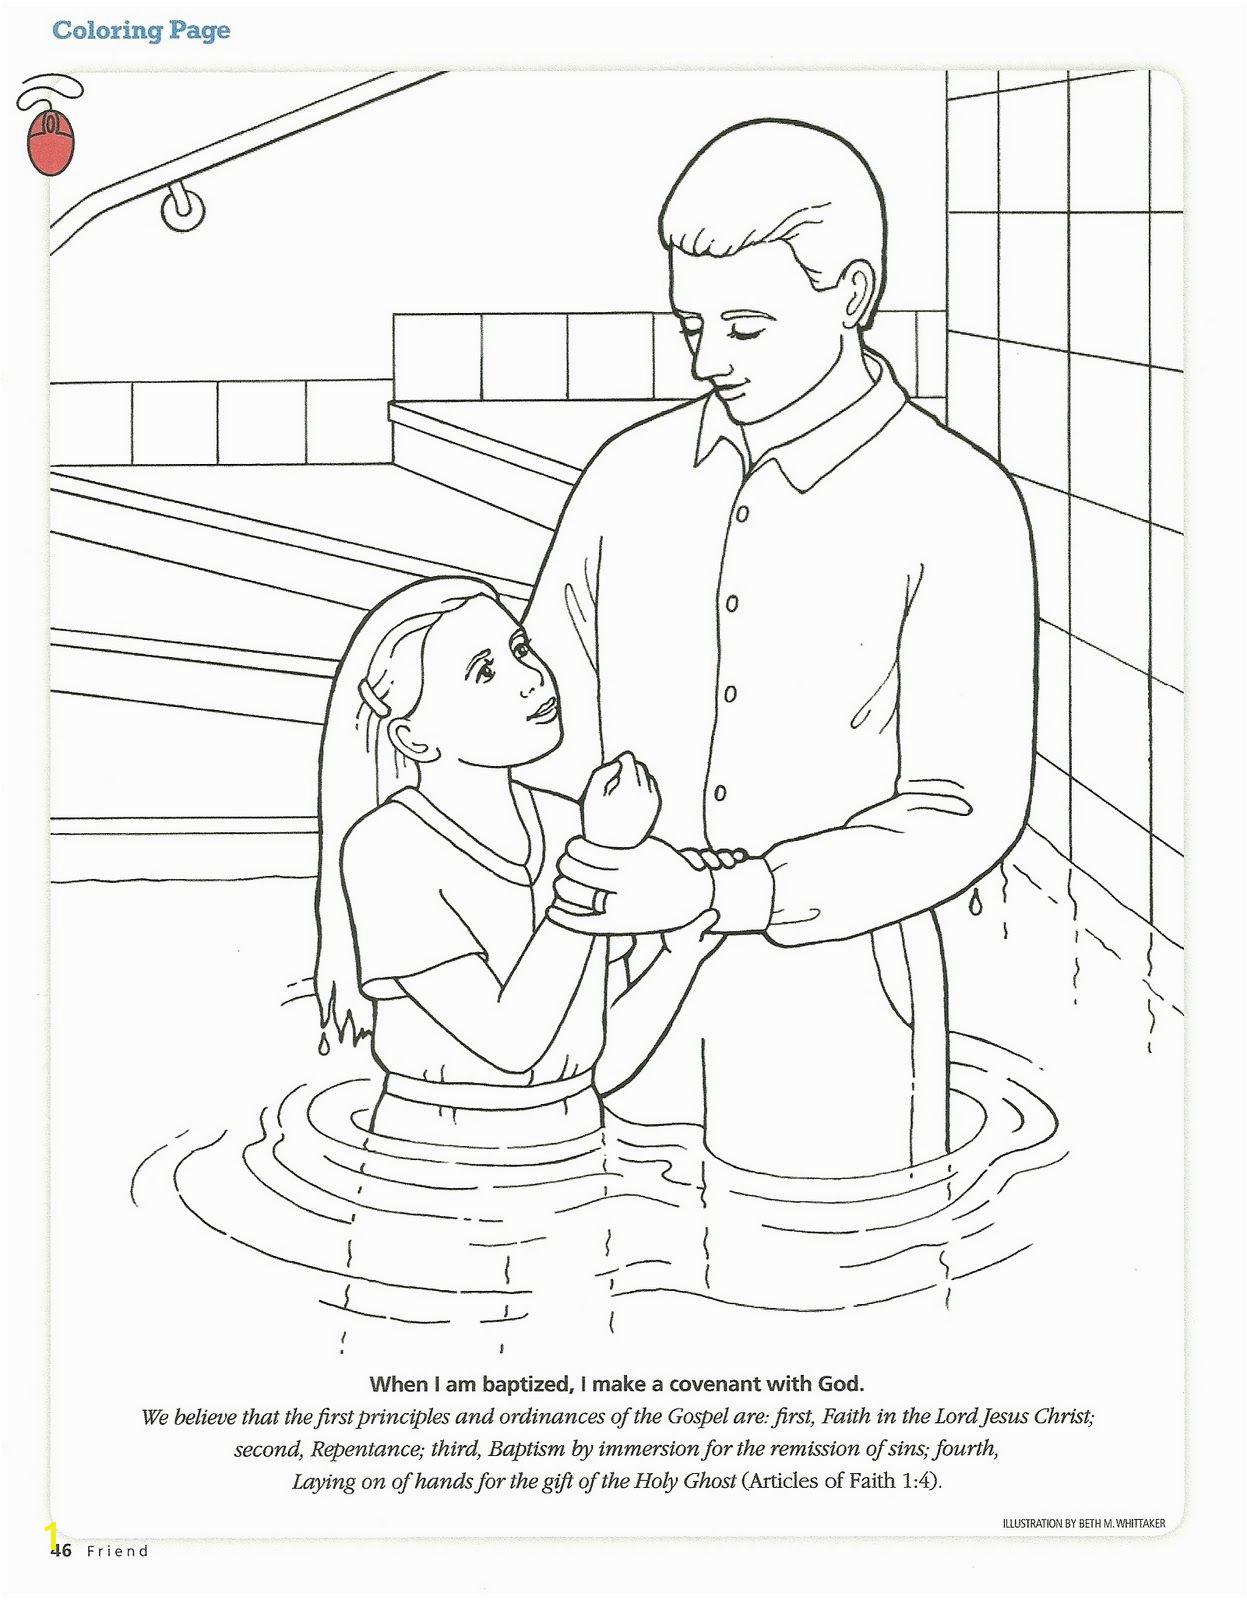 Helping others coloring pages